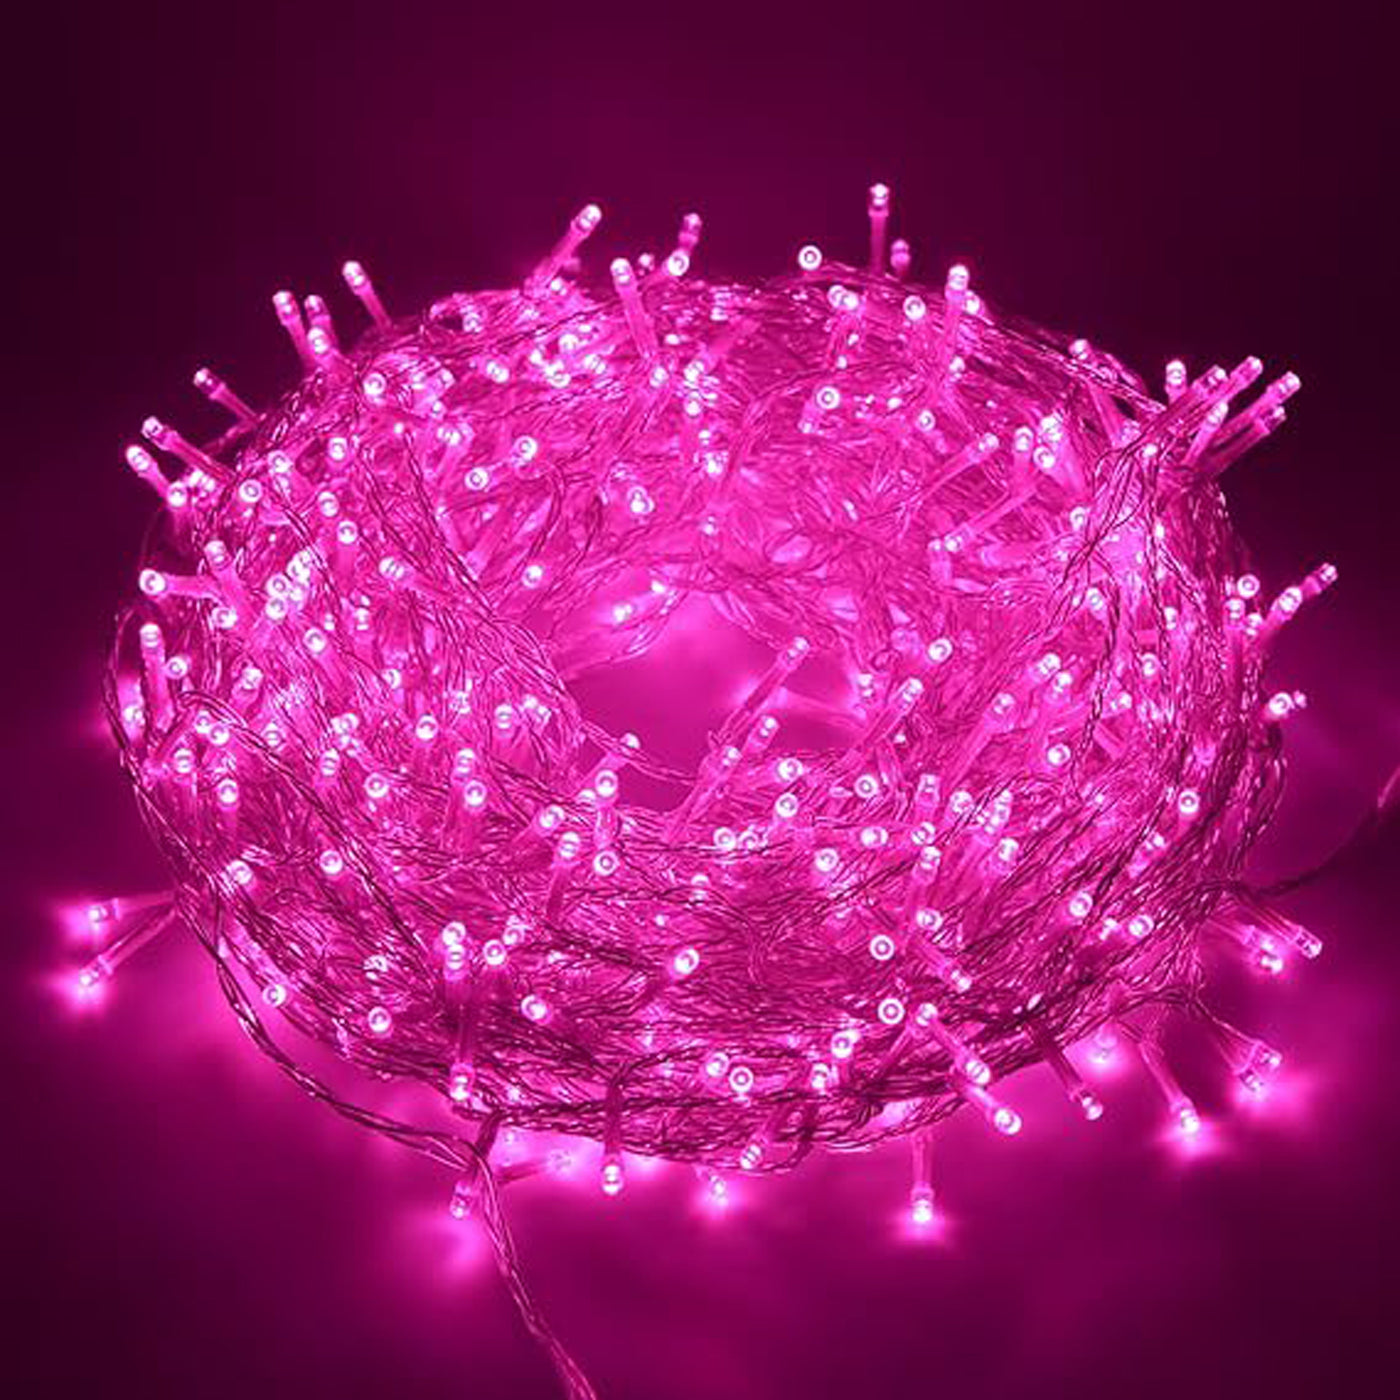 DecorTwist LED String Light for Home and Office Decor | Indoor & Outdoor Decorative Lights | Christmas | Diwali | Wedding | 15 Meter Length (Pack of 4) (Pink)